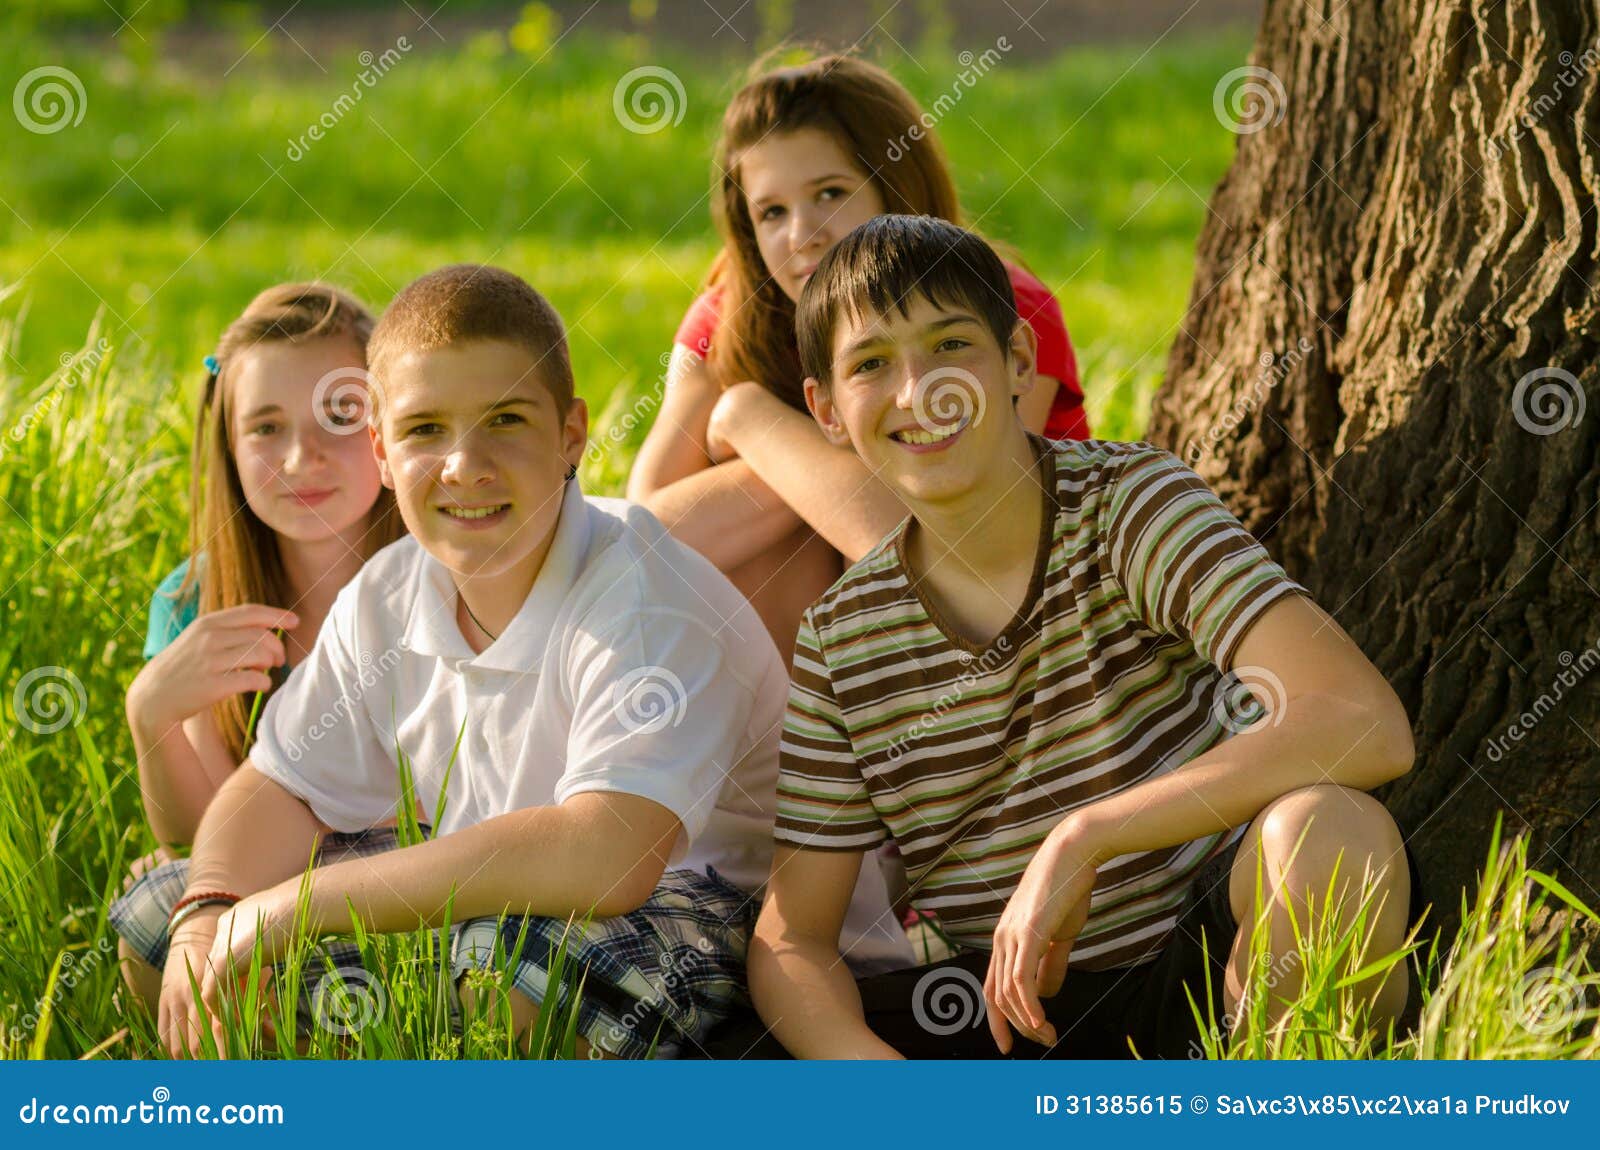 Four Happy Teenagers in the Nature Stock Image - Image of happy ...